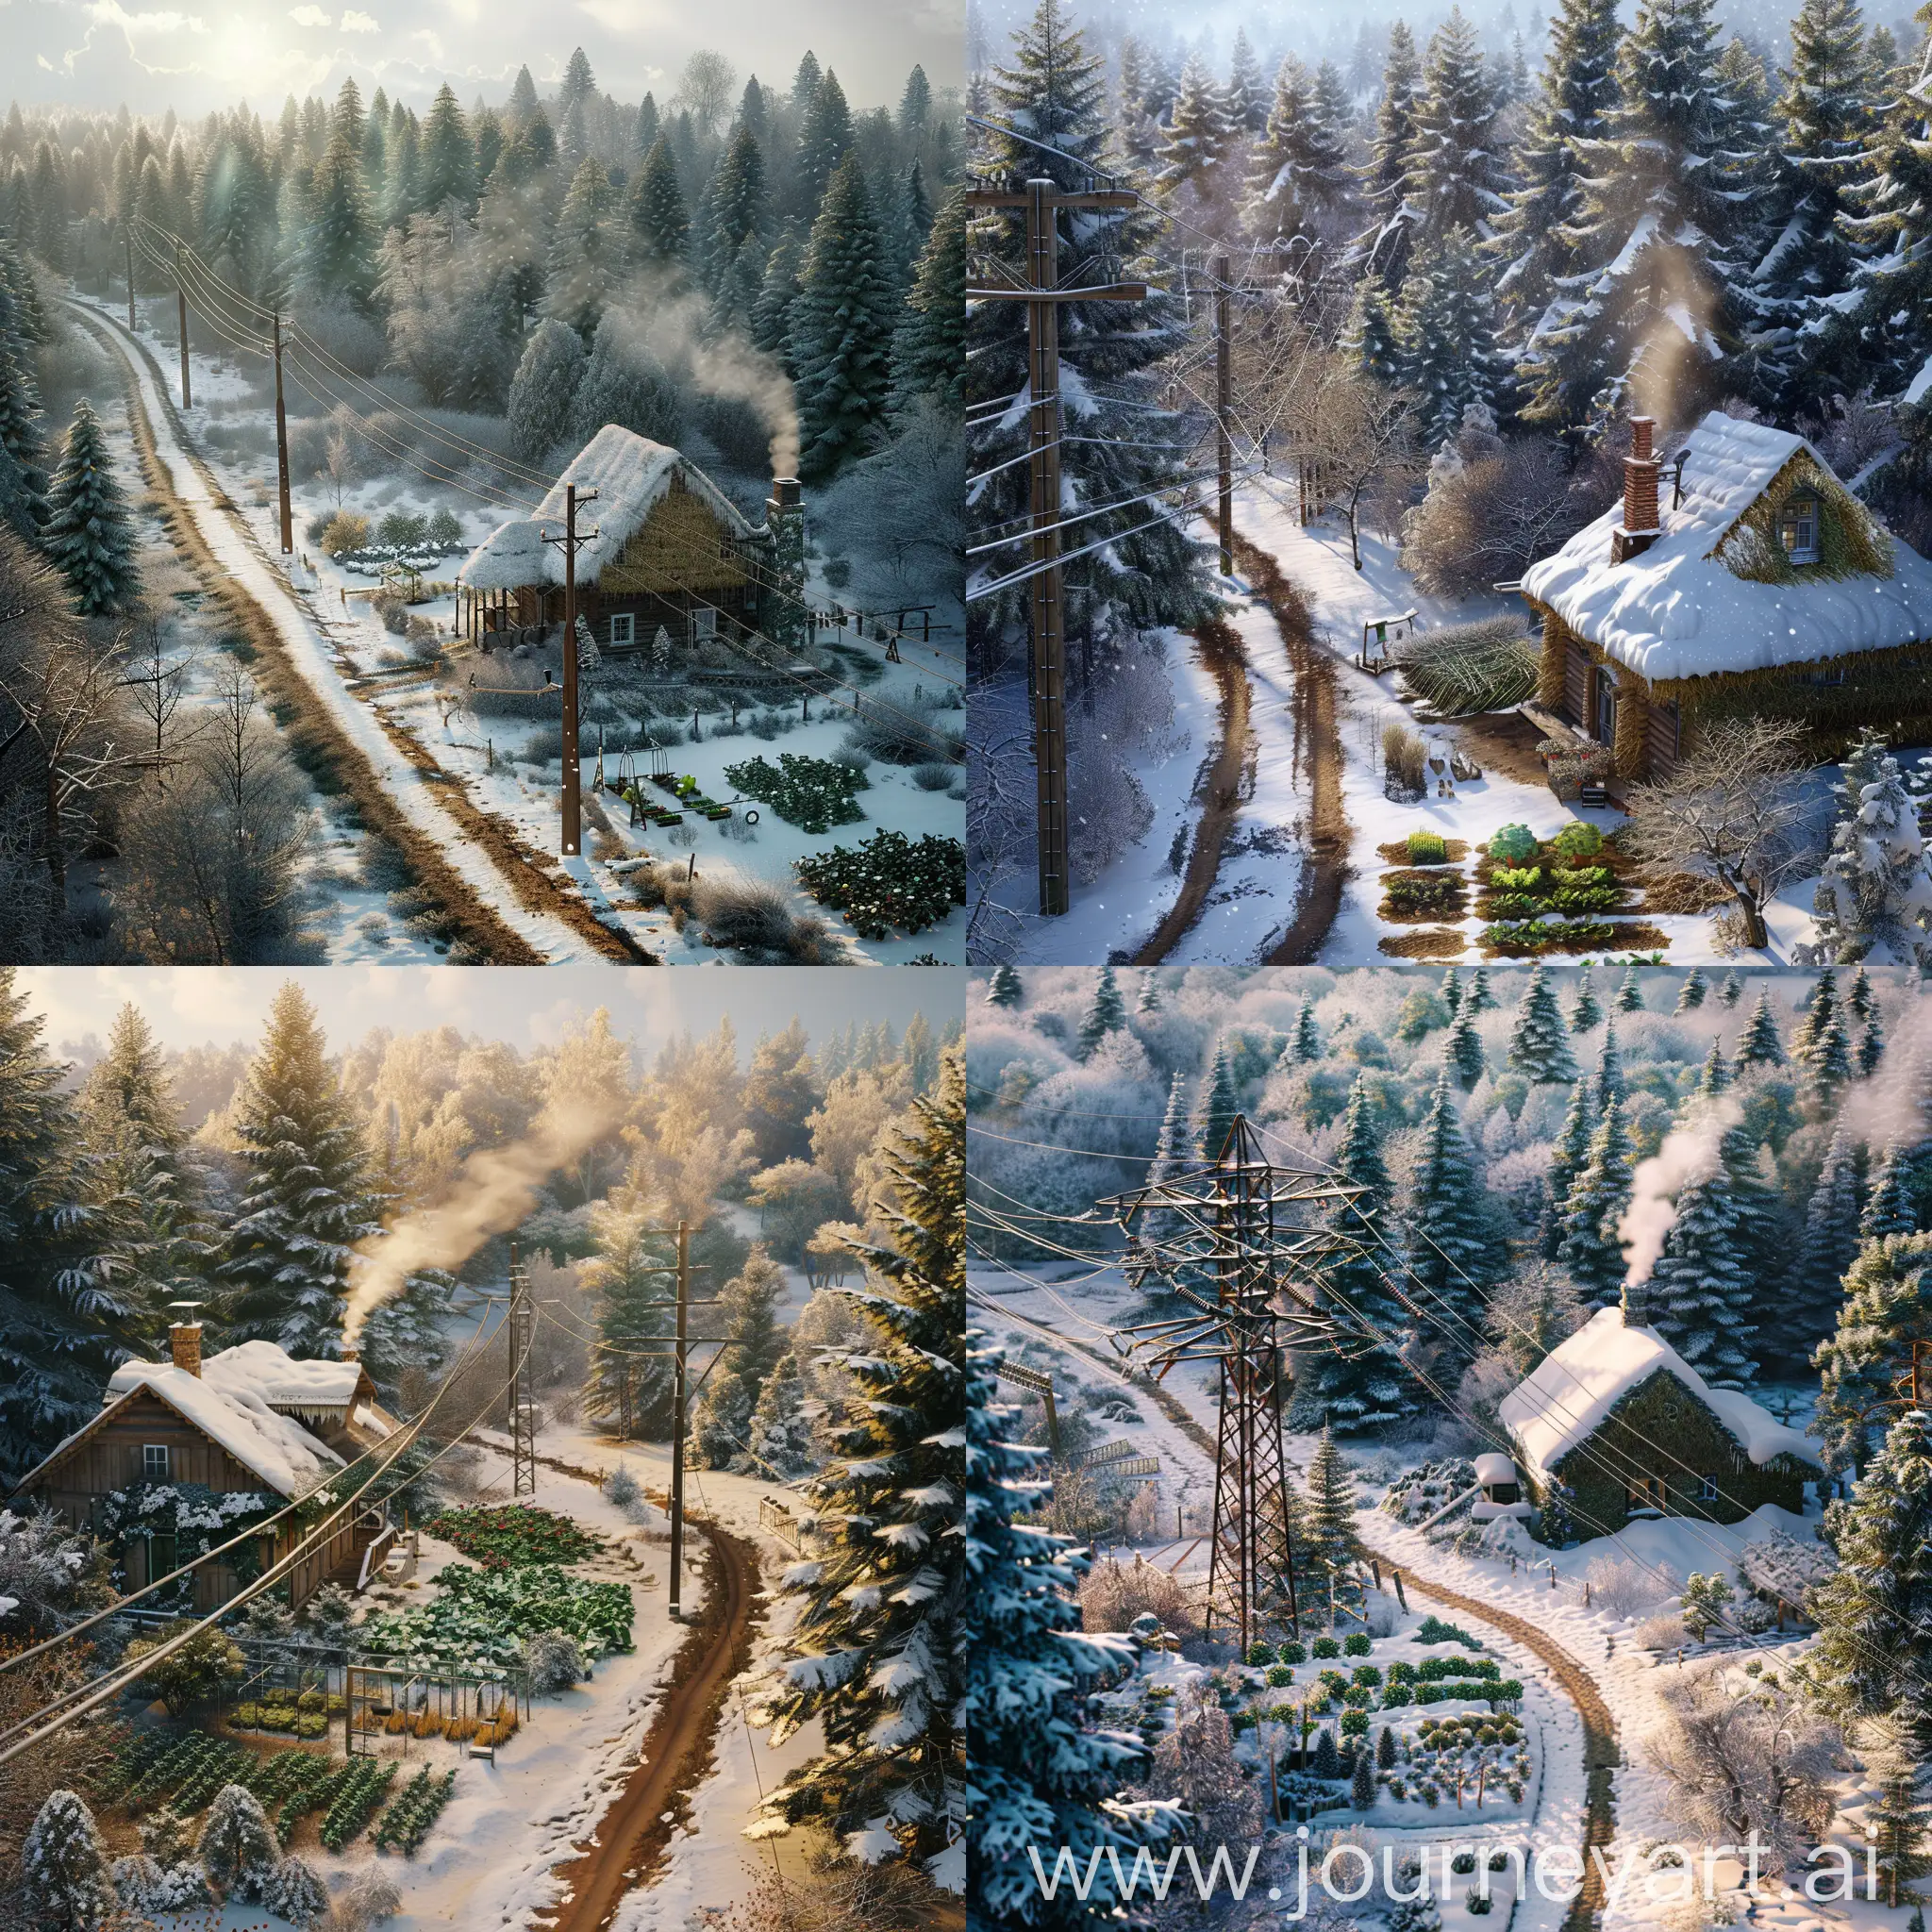 Winter-Wonderland-Cozy-SnowCovered-Cottage-Amidst-Coniferous-Forest-with-Power-Lines-and-Vegetable-Gardens